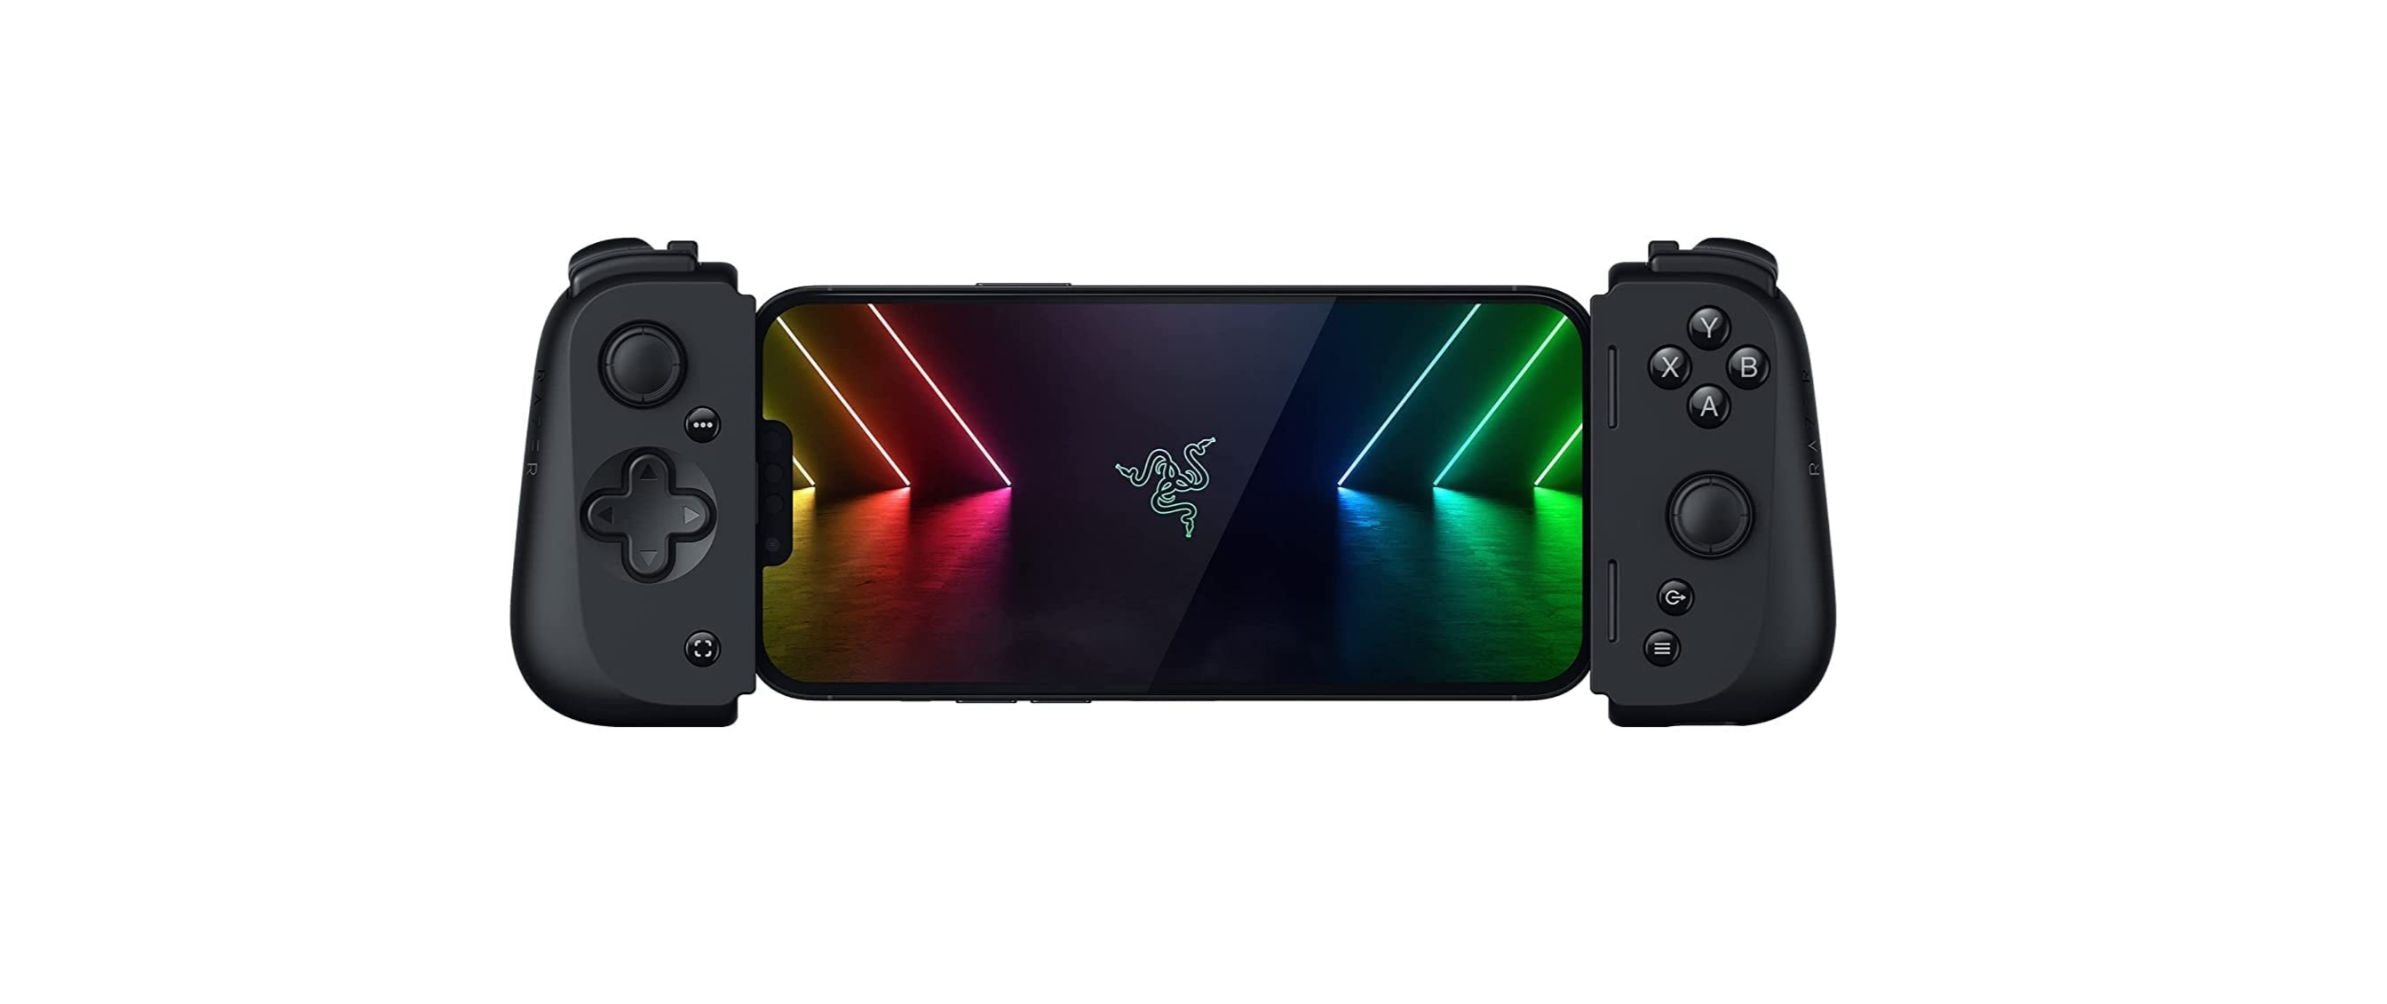 Razer Kishi V2 Now Supports Mapping Controls to Touch Inputs